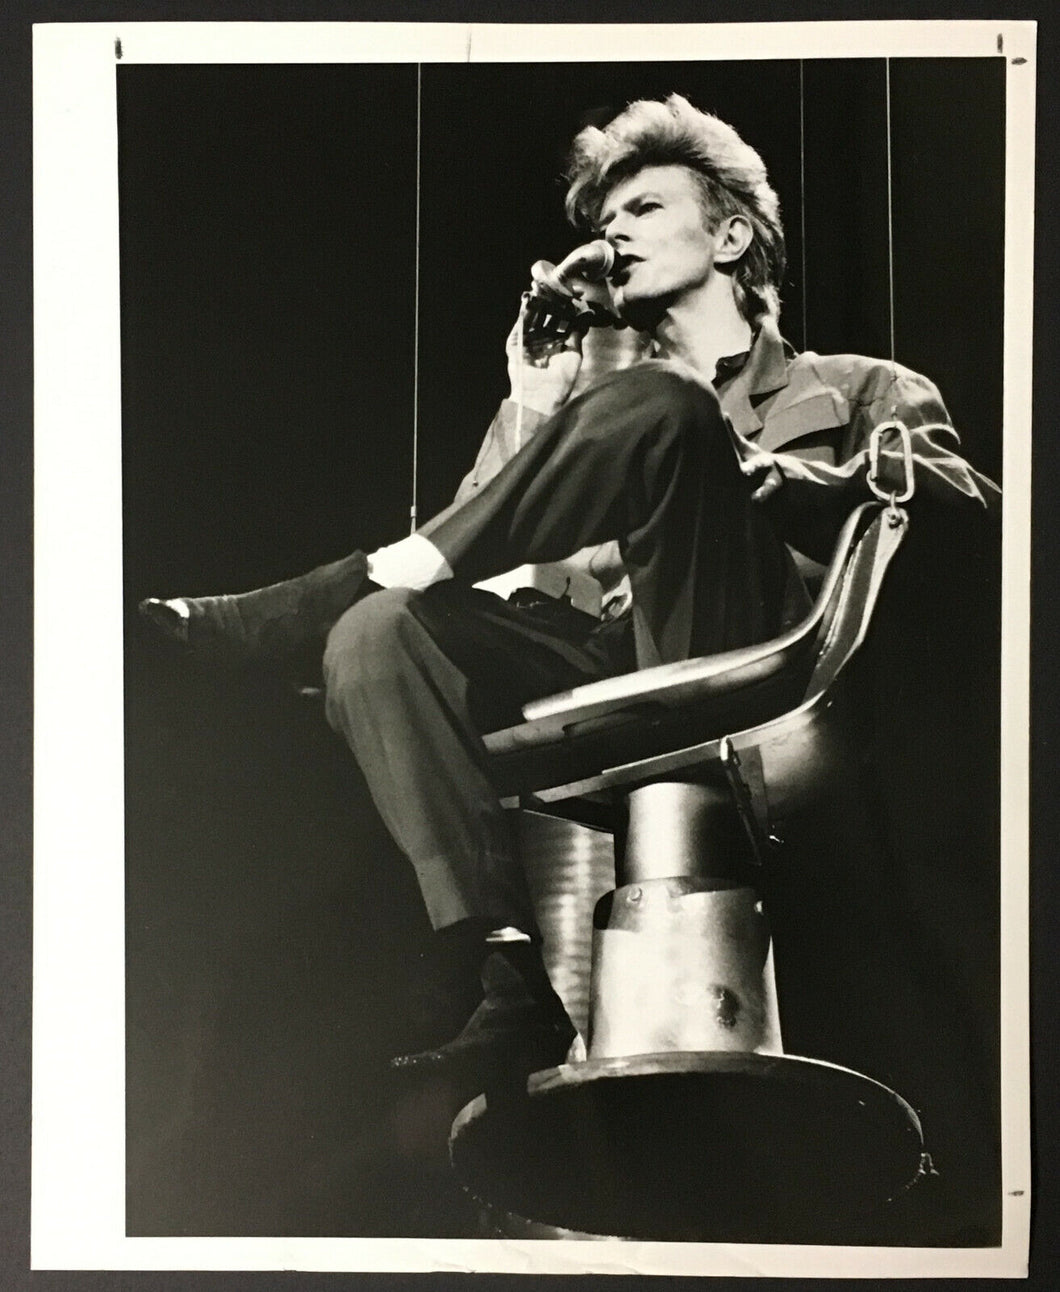 1987 David Bowie Concert Photo Tampa Bay Picture Taken By Maurice Rivenbark